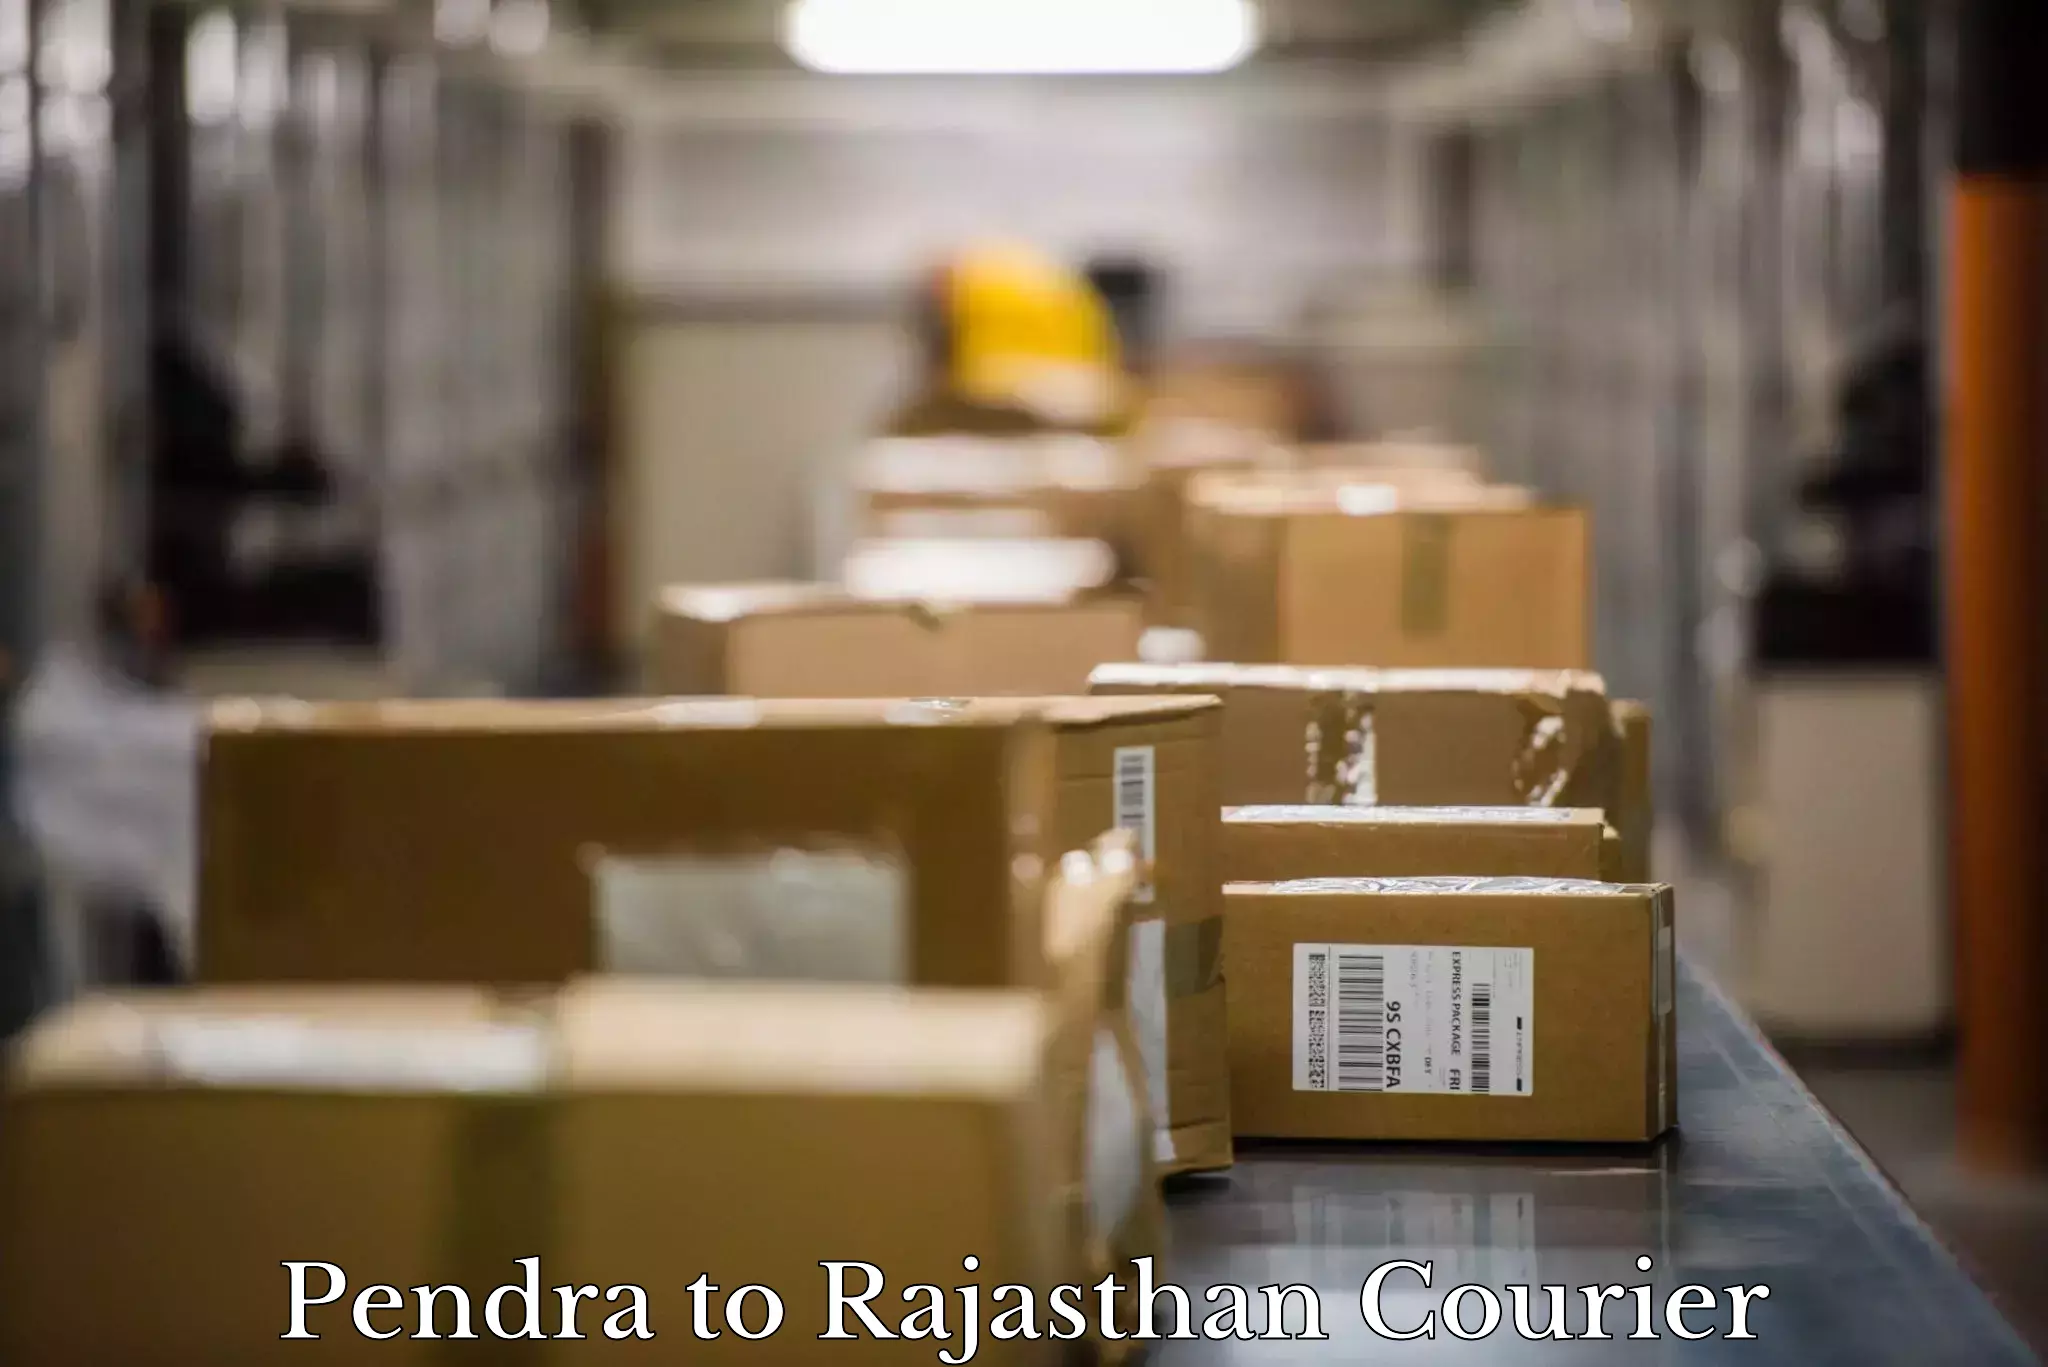 Trusted relocation experts Pendra to Rajasthan